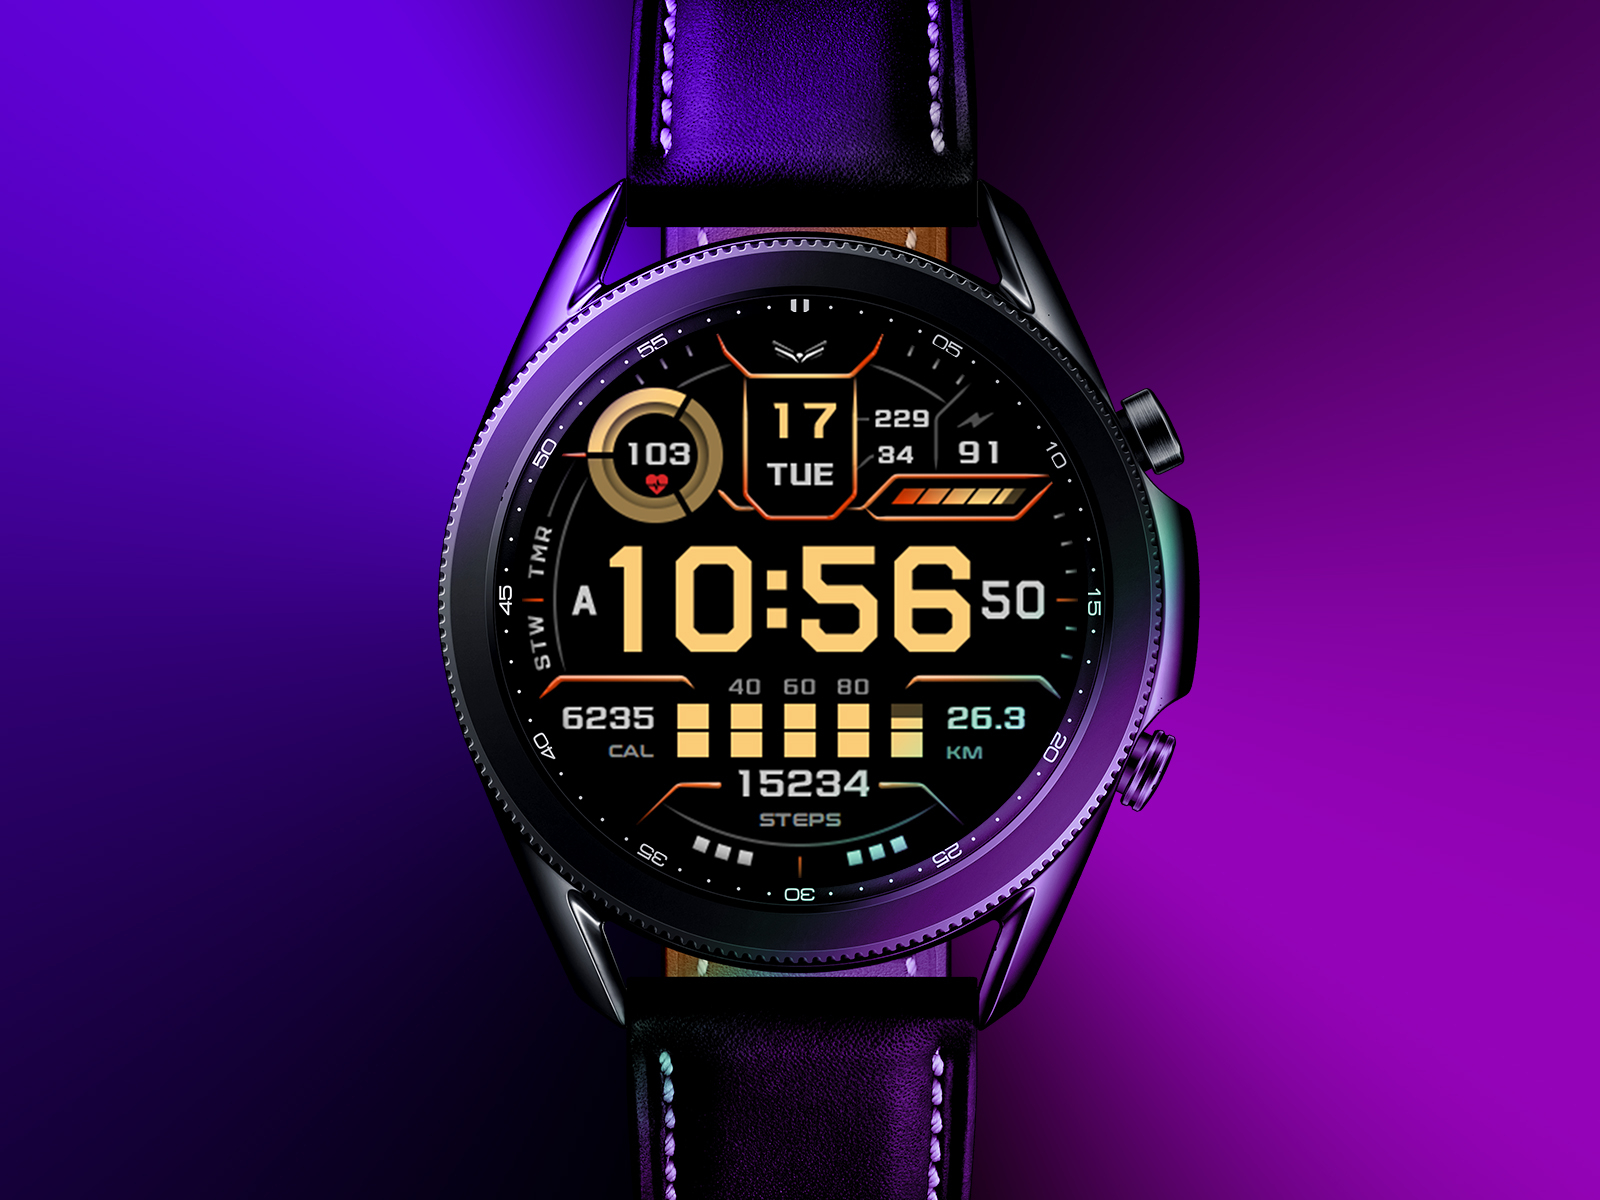 BALLOZI Watch Faces - 50% OFF Stealth Marine Series(Wear OS and Tizen)!  STEALTH MARINE Series digital watch faces are on 50% Off SALE until  Saturday July 16, 2022 BALLOZI STEALTH MARINE:  https://play.google.com/store/apps/details?id=com.watchfacestudio ...